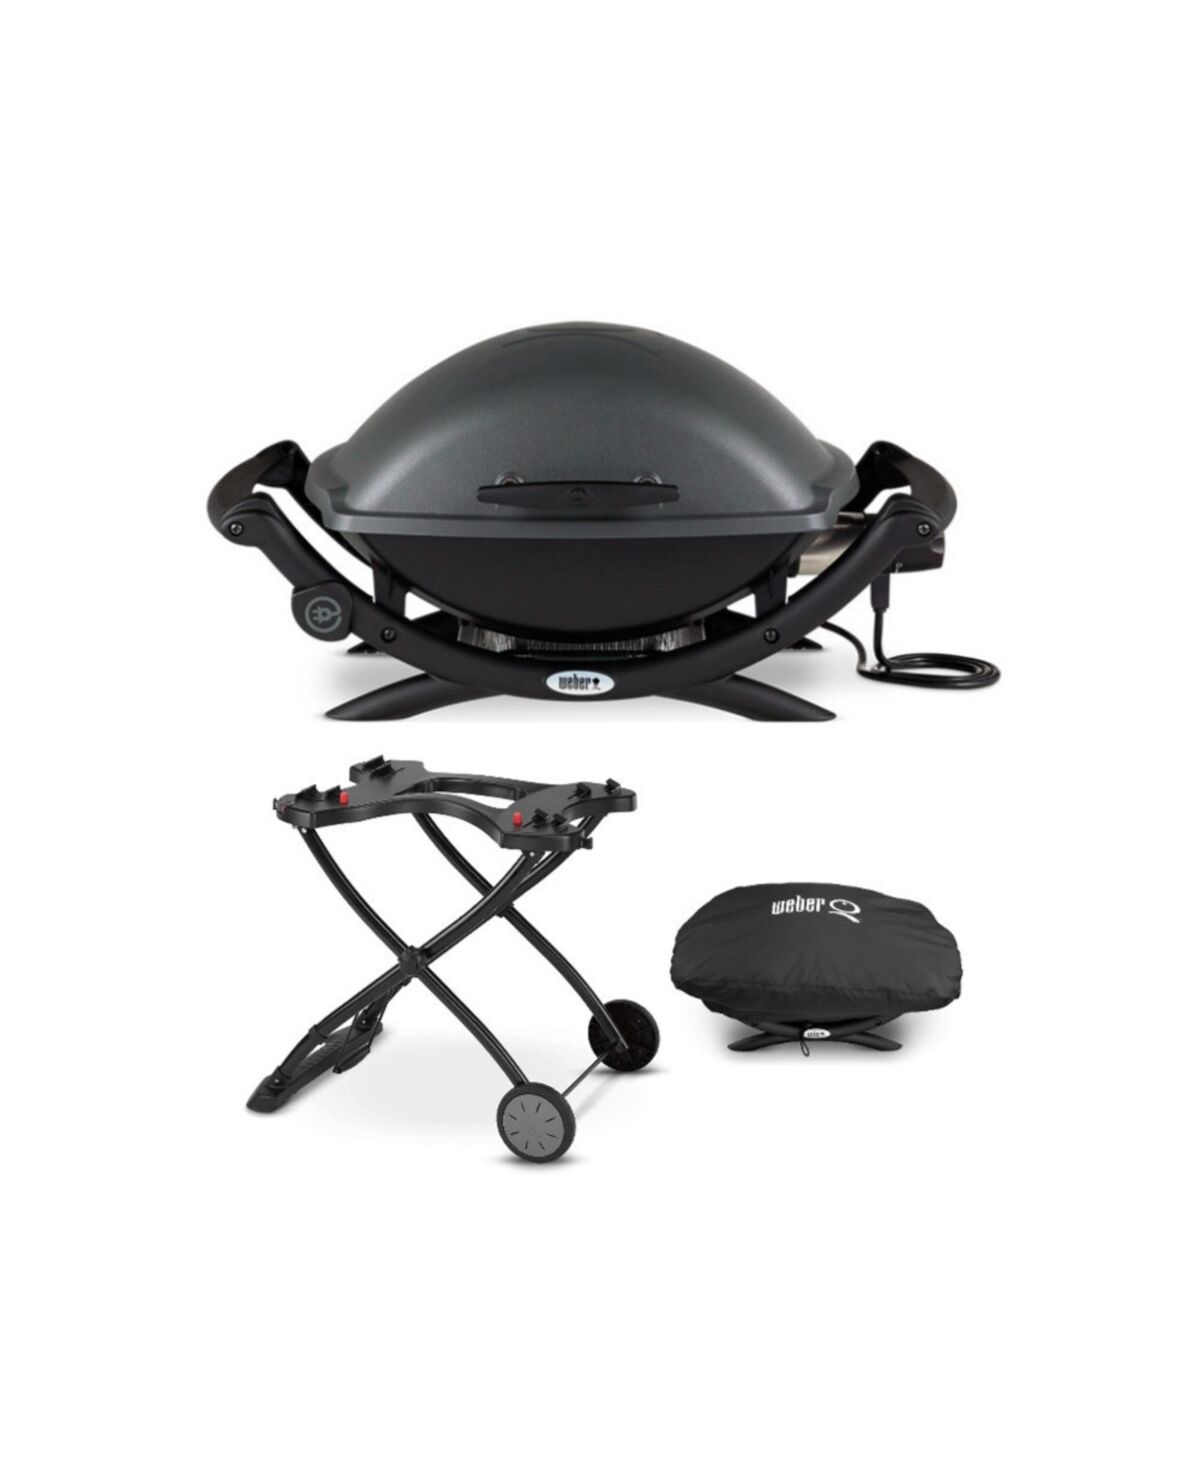 Weber Q 2400 Electric Grill (Black) with Grill Cover and Cart Bundle - Black